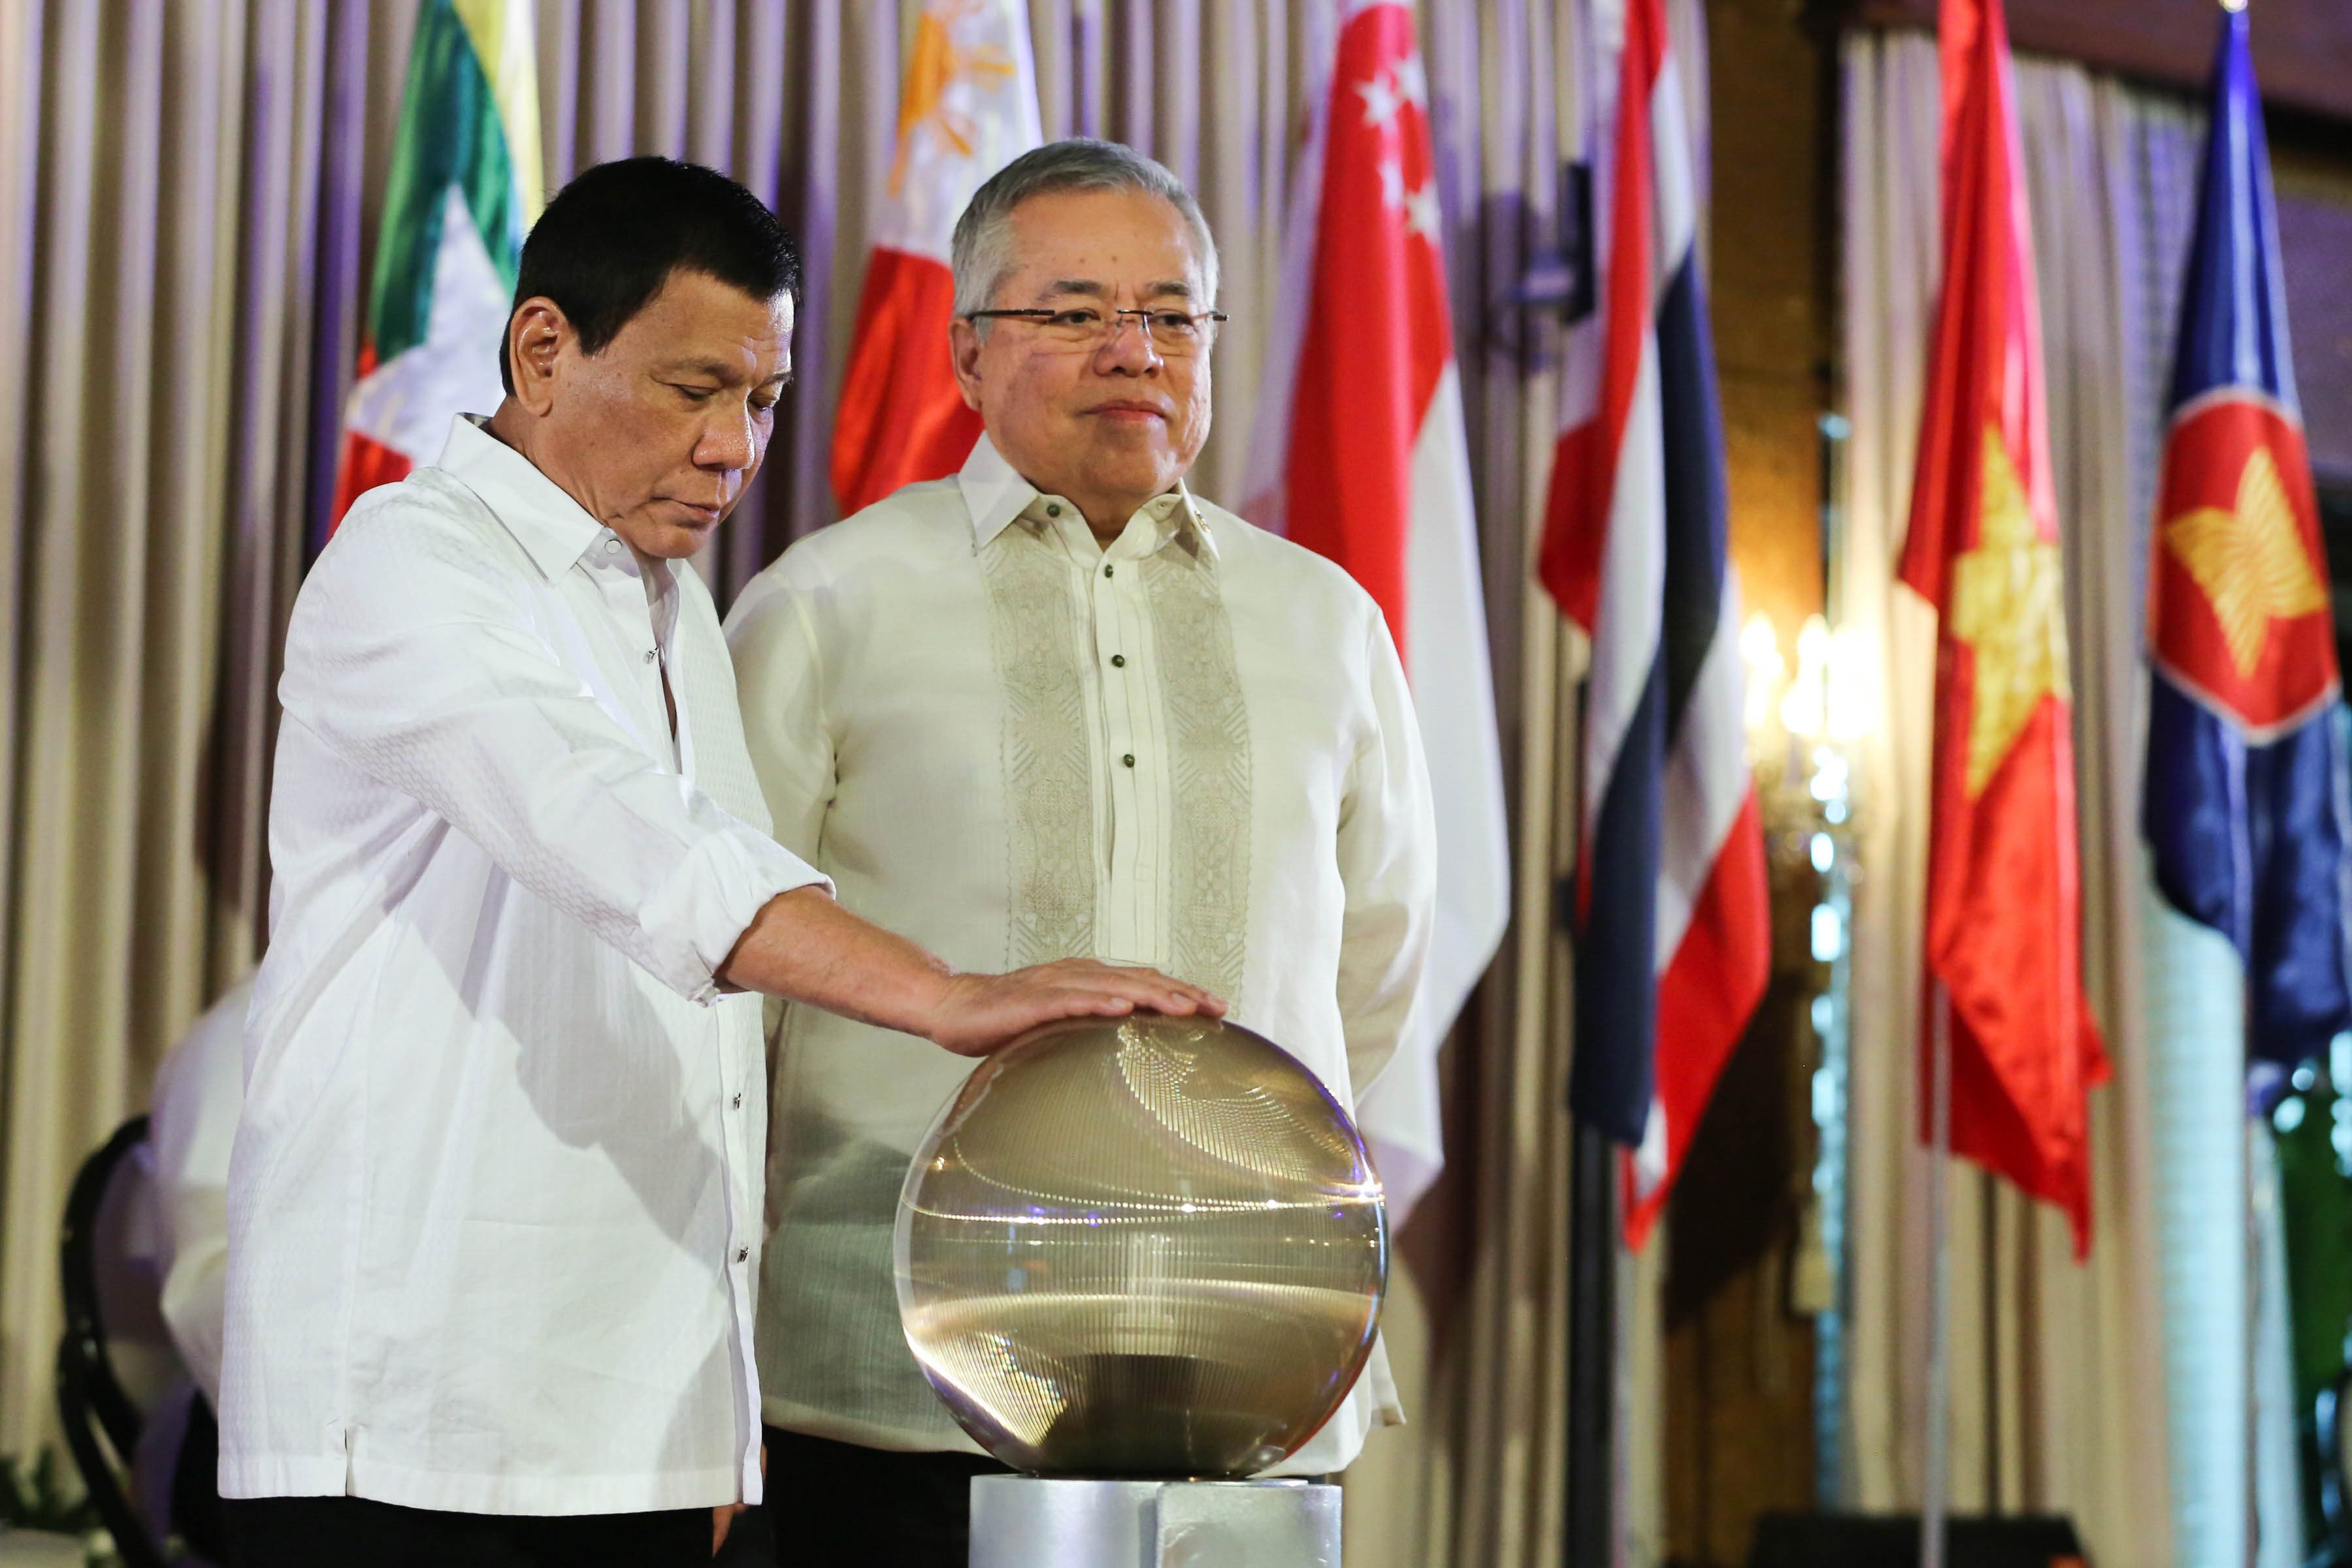 FUELING ASEAN GROWTH. President Rodrigo Duterte is assisted by Trade Secretary Ramon Lopez as he launches the Association of Southeast Asian Nations (ASEAN) 2017 Business and Investment Program at Malacañang Palace on January 24, 2017. Photo by King Rodriguez/Presidential Photo  